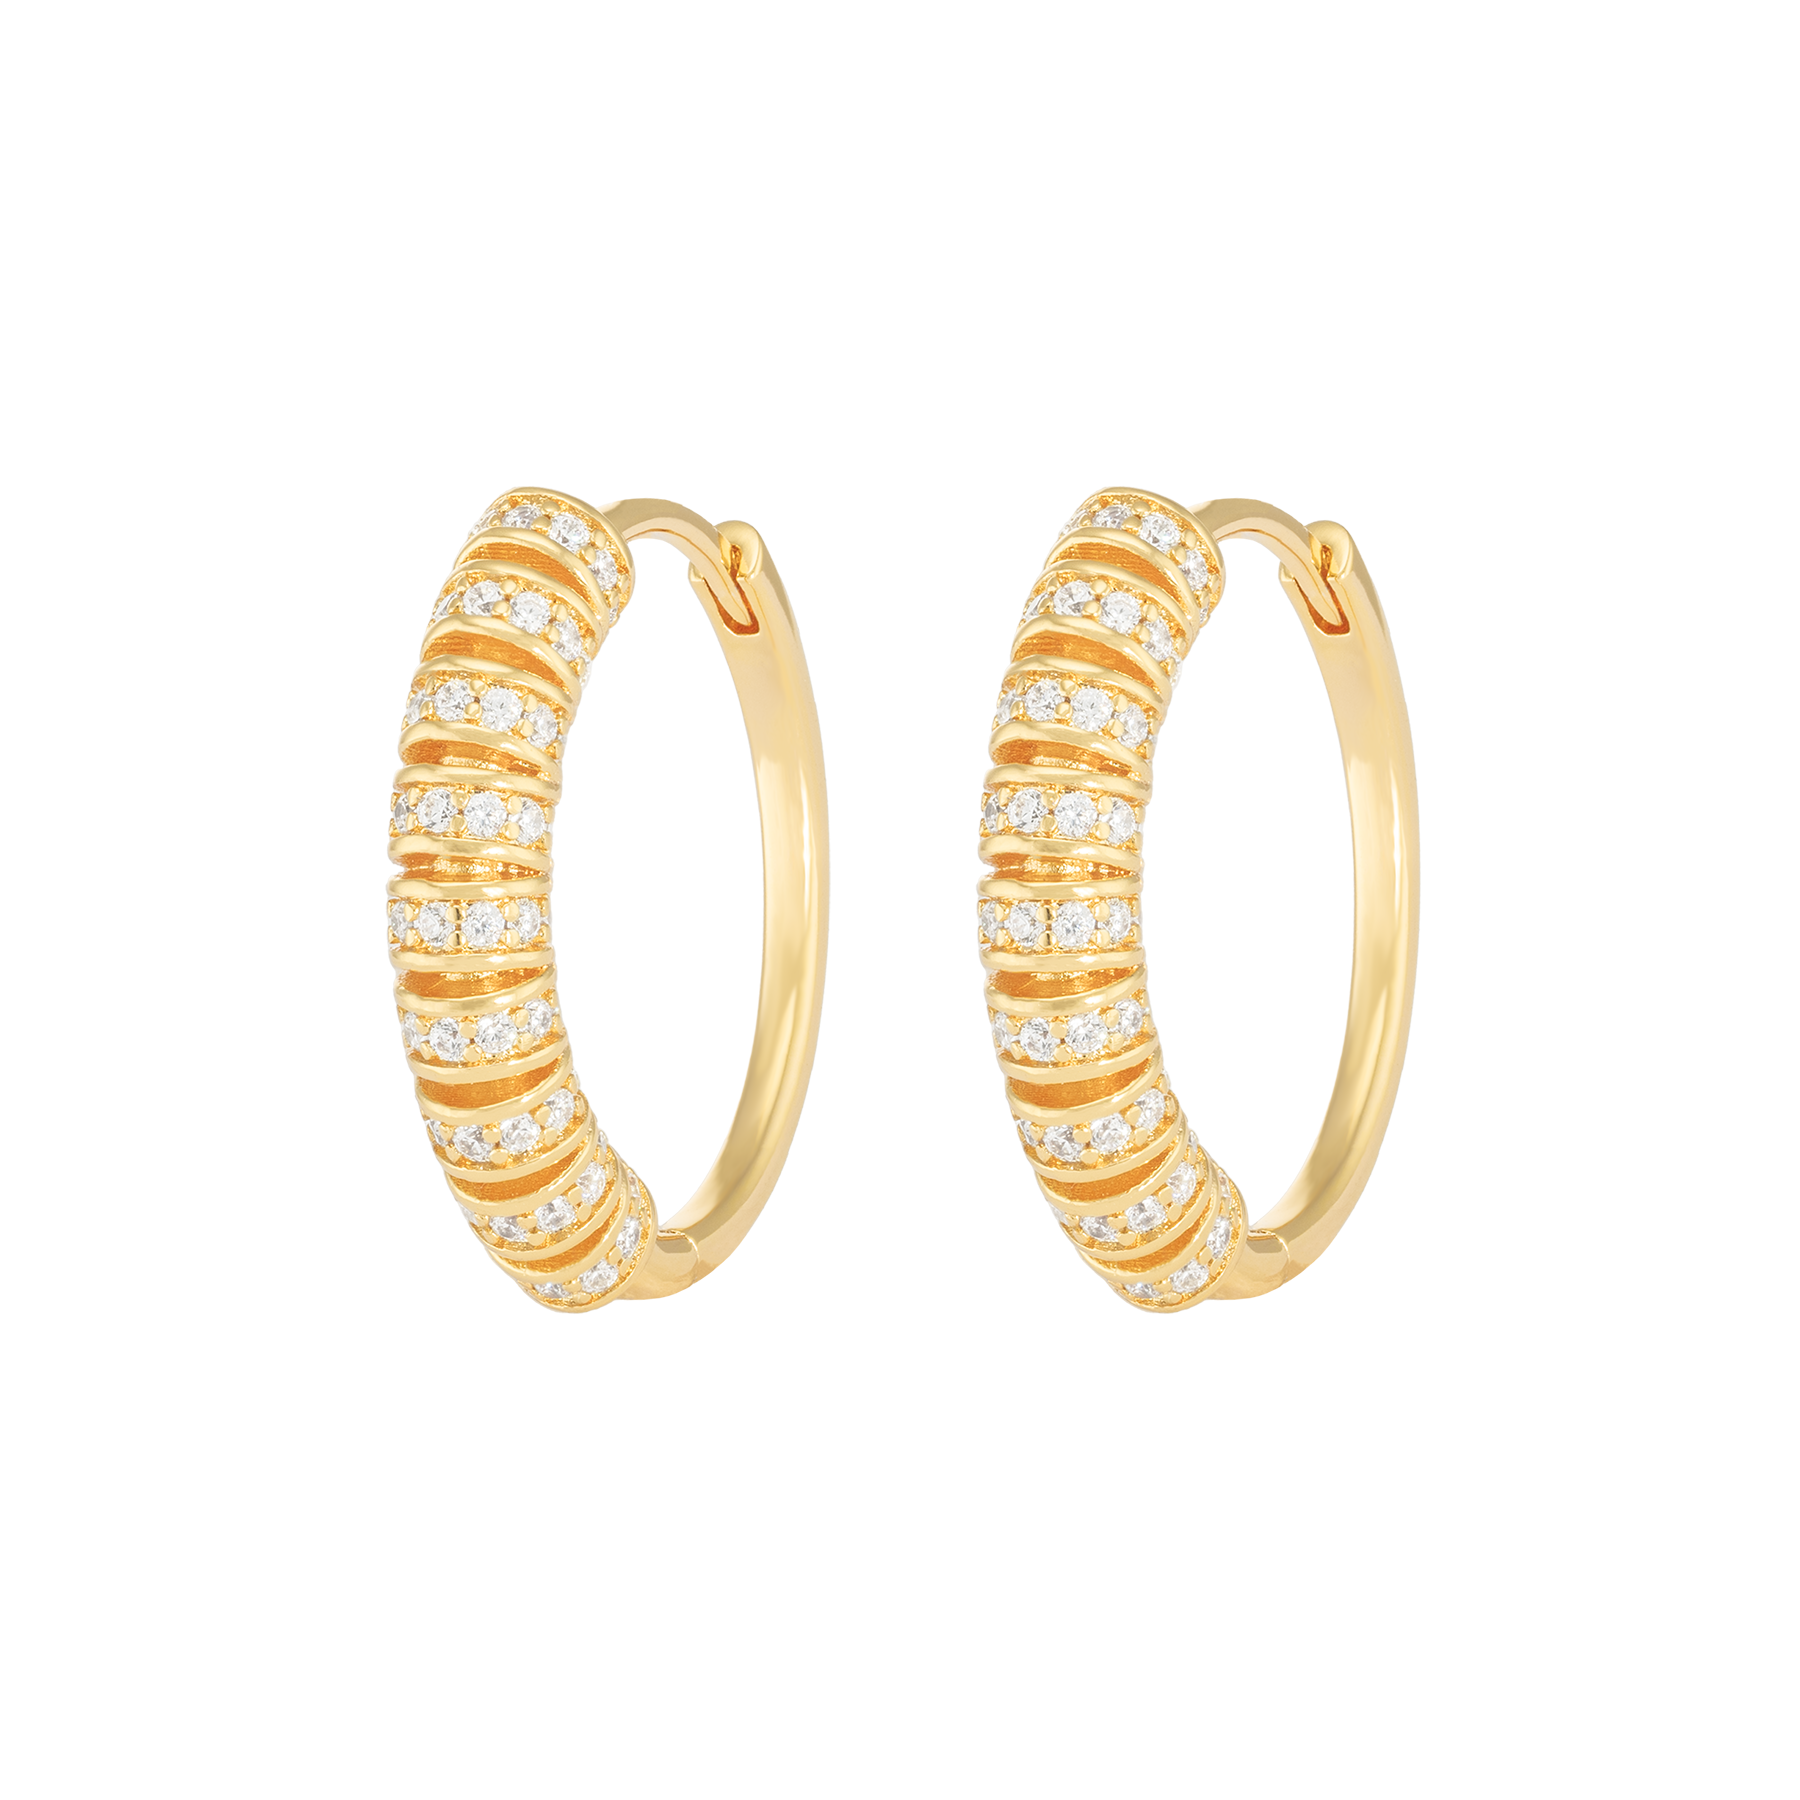 Image of Pile hoops from Emilia by Bon Dep